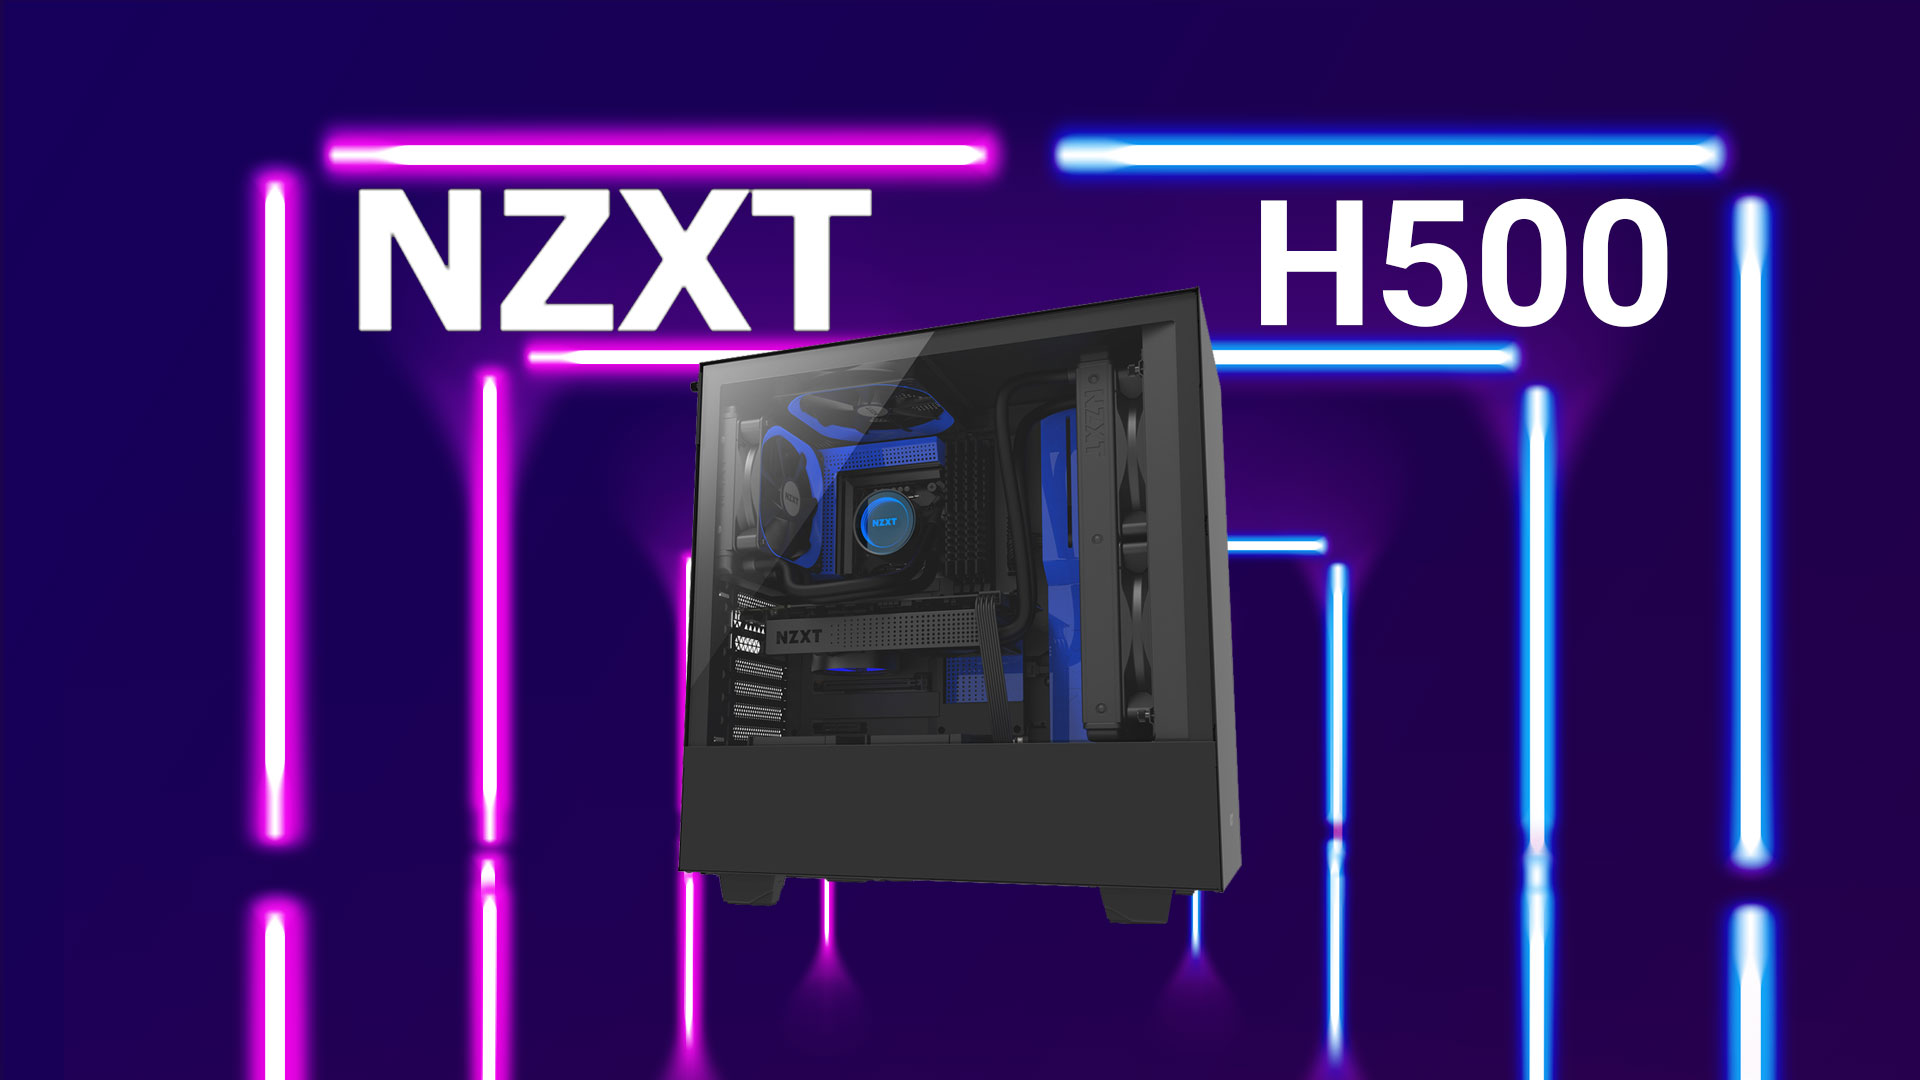 NZXT H500 RECENSIONE 2019